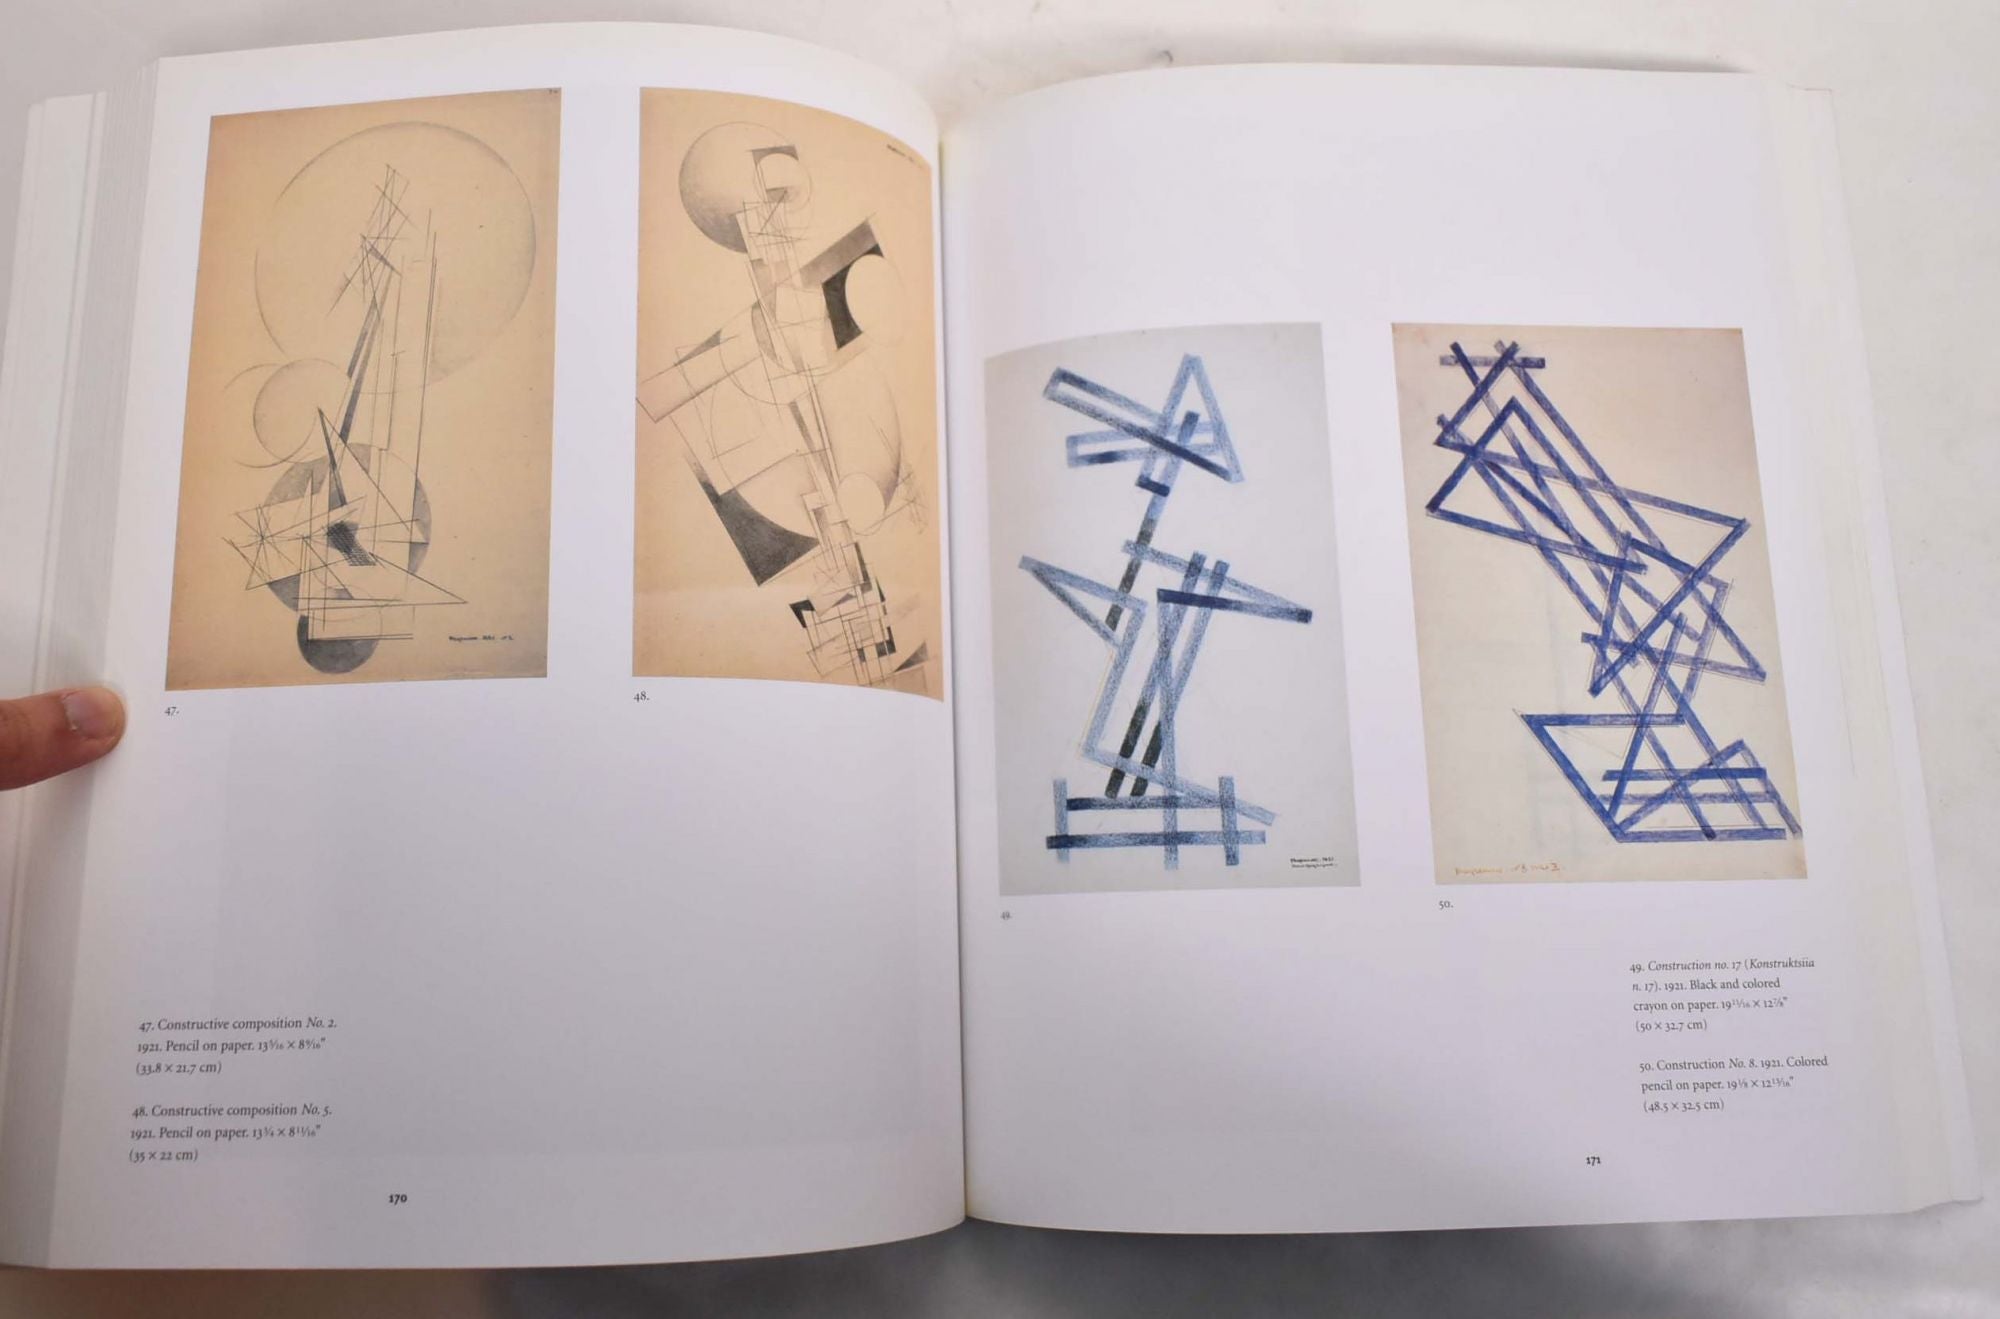 Aleksandr Rodchenko: Painting, Drawing, Collage, Design, Photography by  Magdelena Dabrowski on Mullen Books